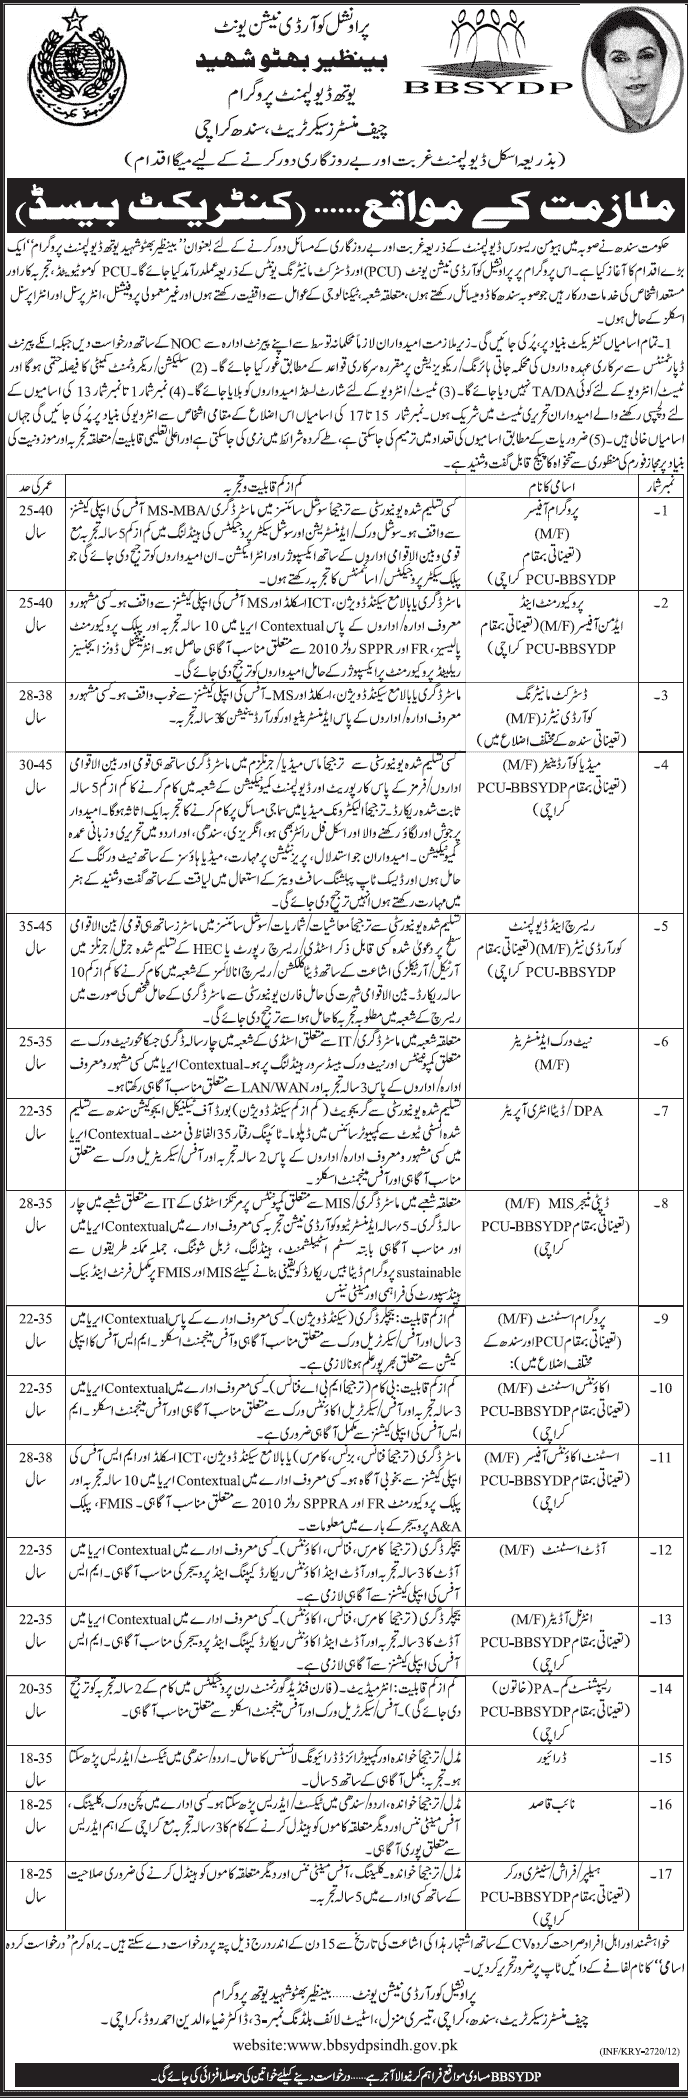 BBSYDP (Benazir Bhutto Shaheed Youth Development Programe) (Provincial Coordination Unit) Required Management and Accounts Staff (Govt. job)